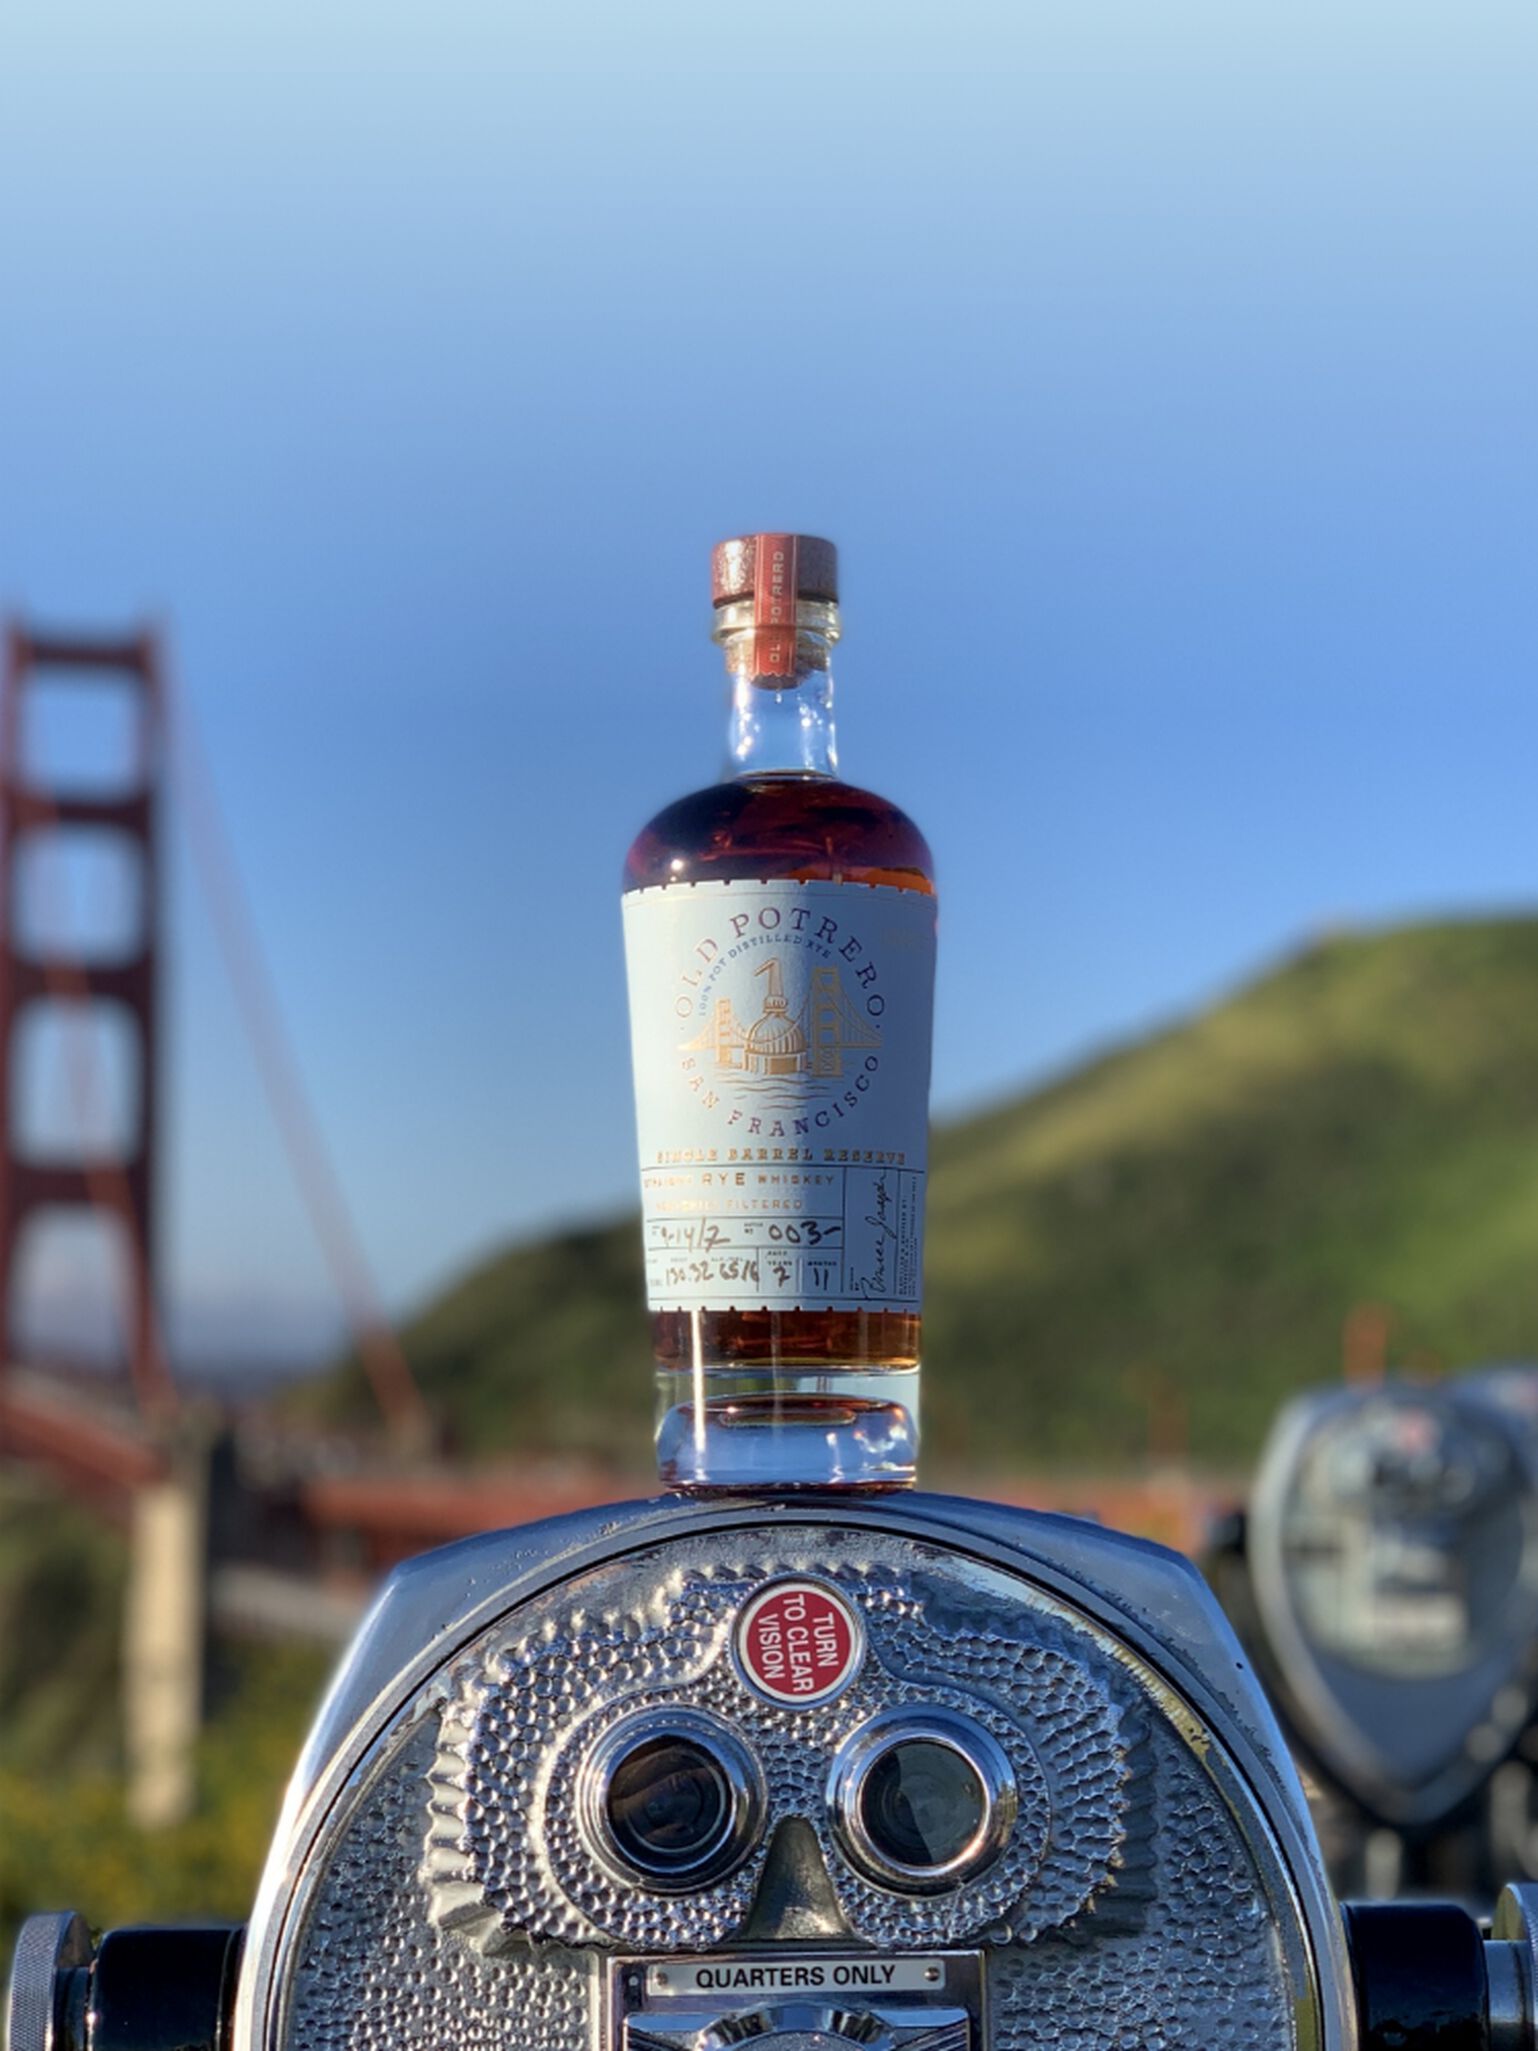 A bottle of Old Potrero Single Barrel Straight Rye Whiskey S1B45 in front of the Golden Gate Bridge